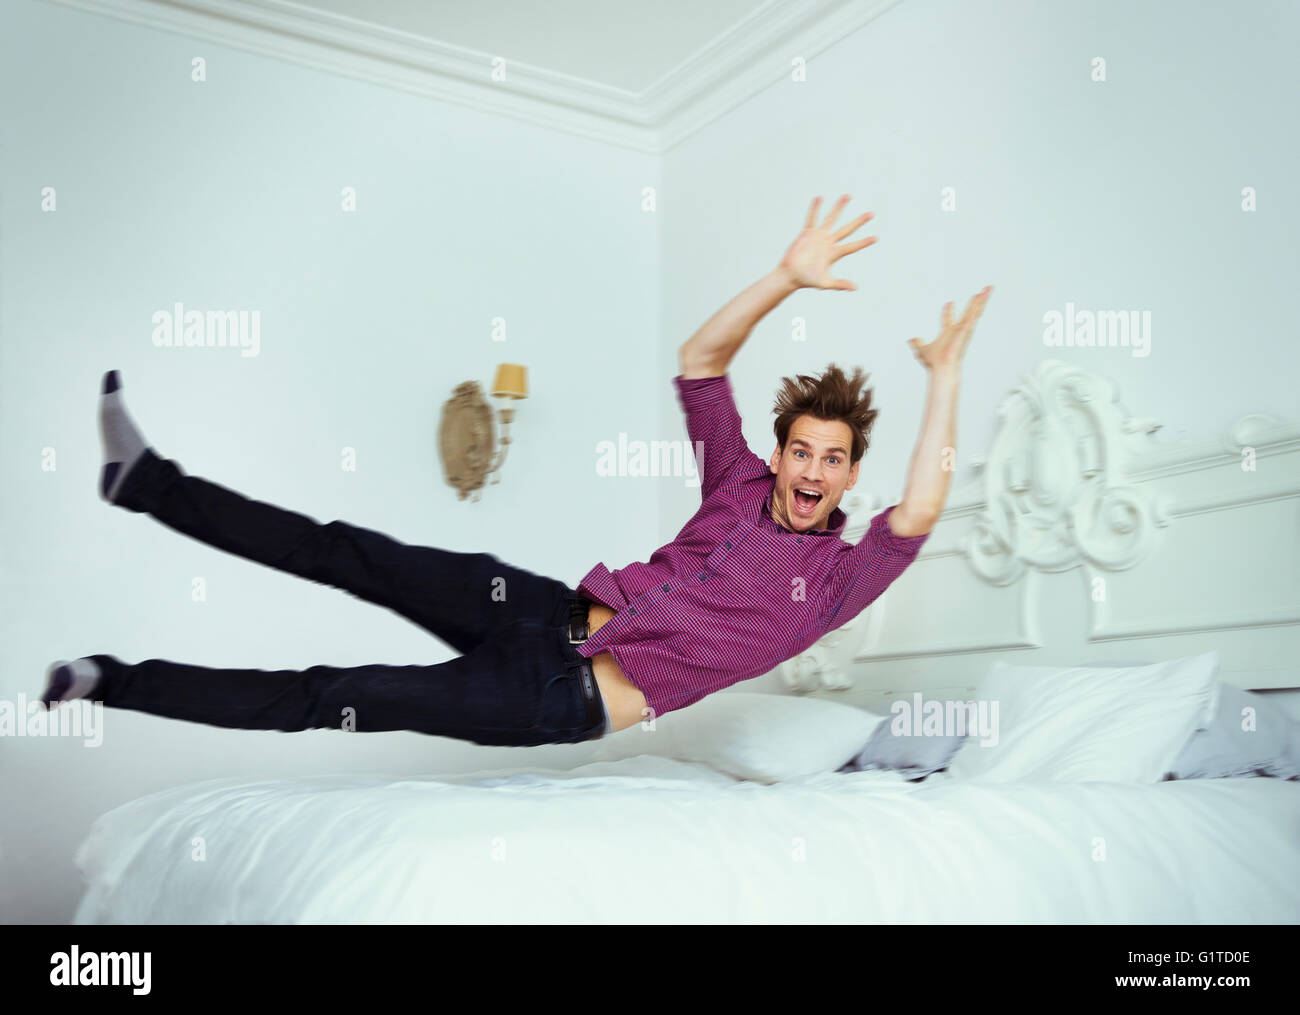 Portrait playful man jumping onto bed Stock Photo